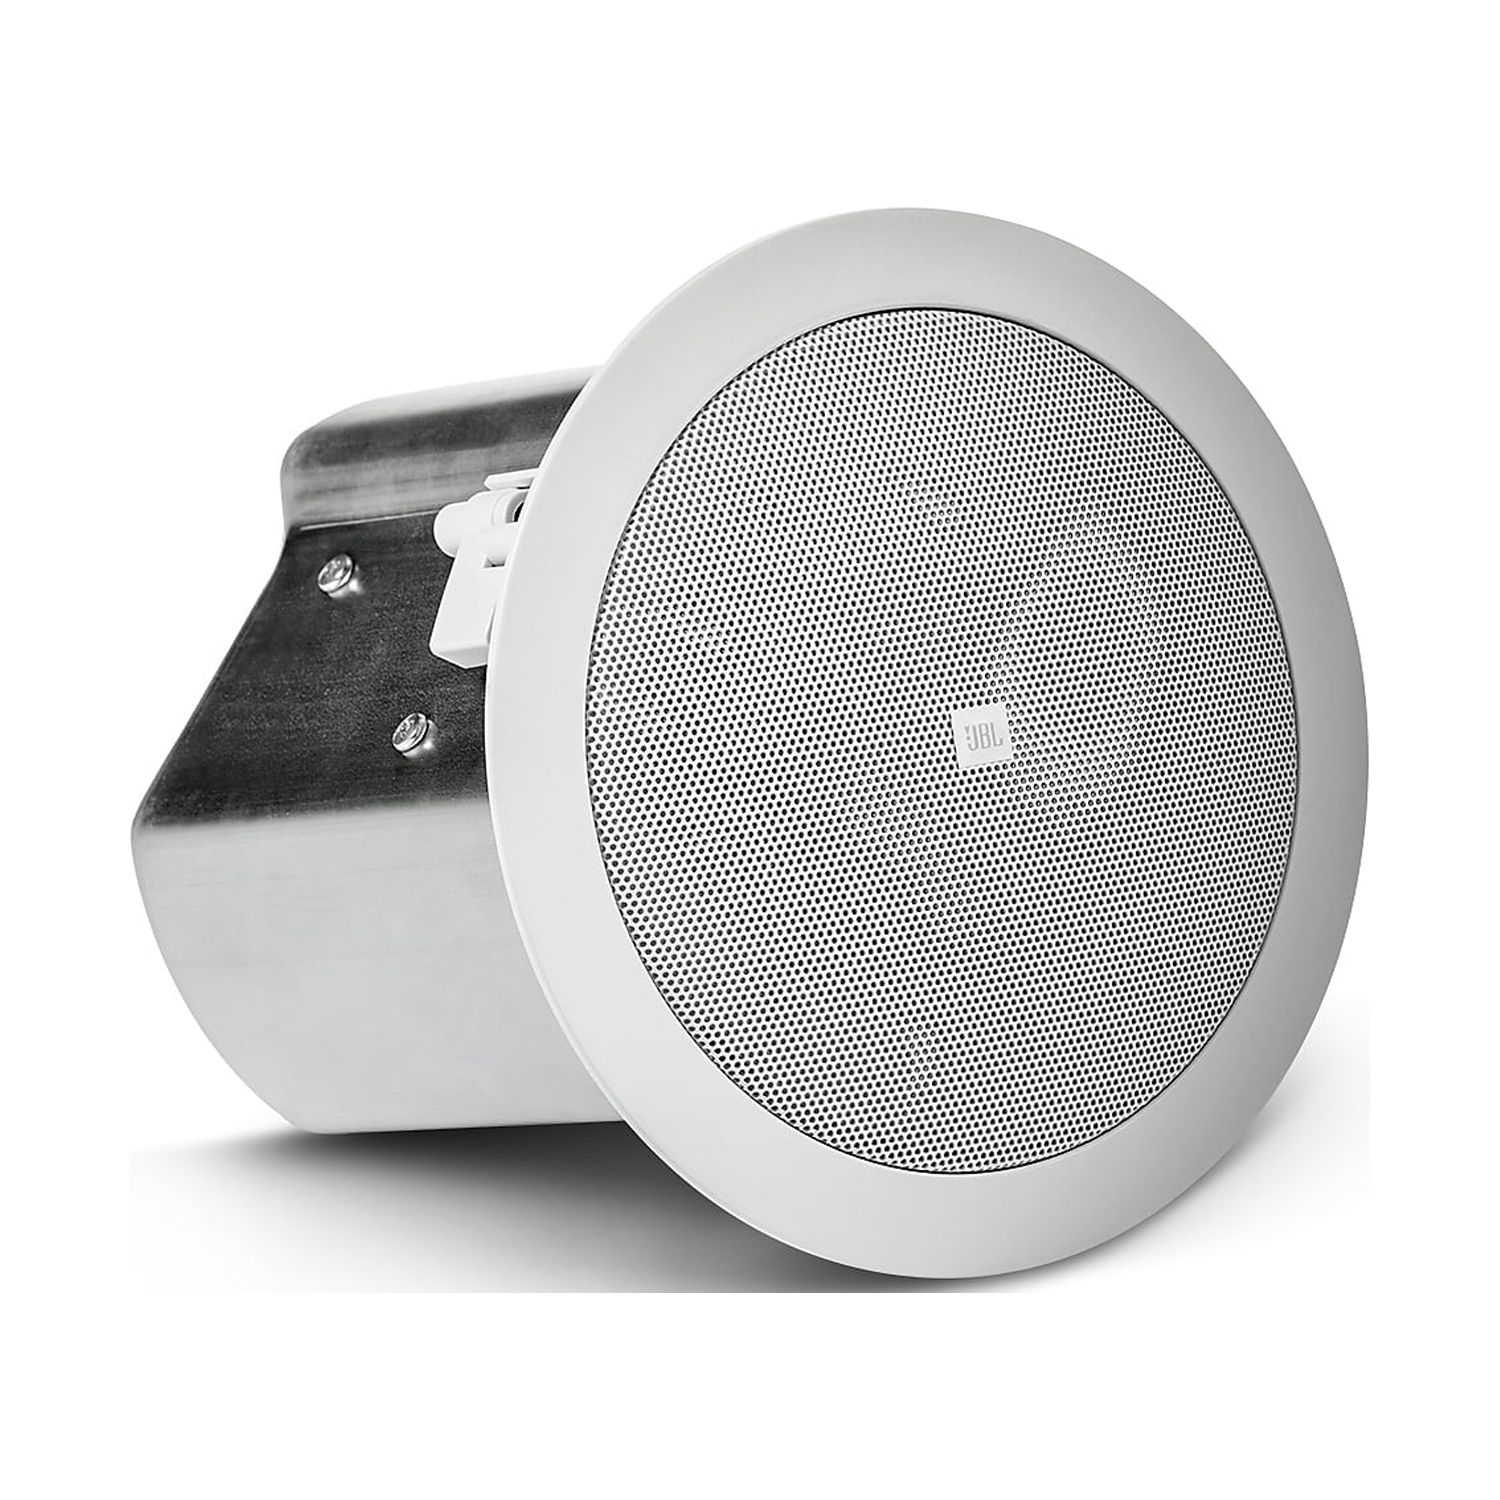 JBL Professional Control CONTROL 14CT 60 (W) Coaxial Ceiling Loudspeaker White CONTROL14CT - image 1 of 3